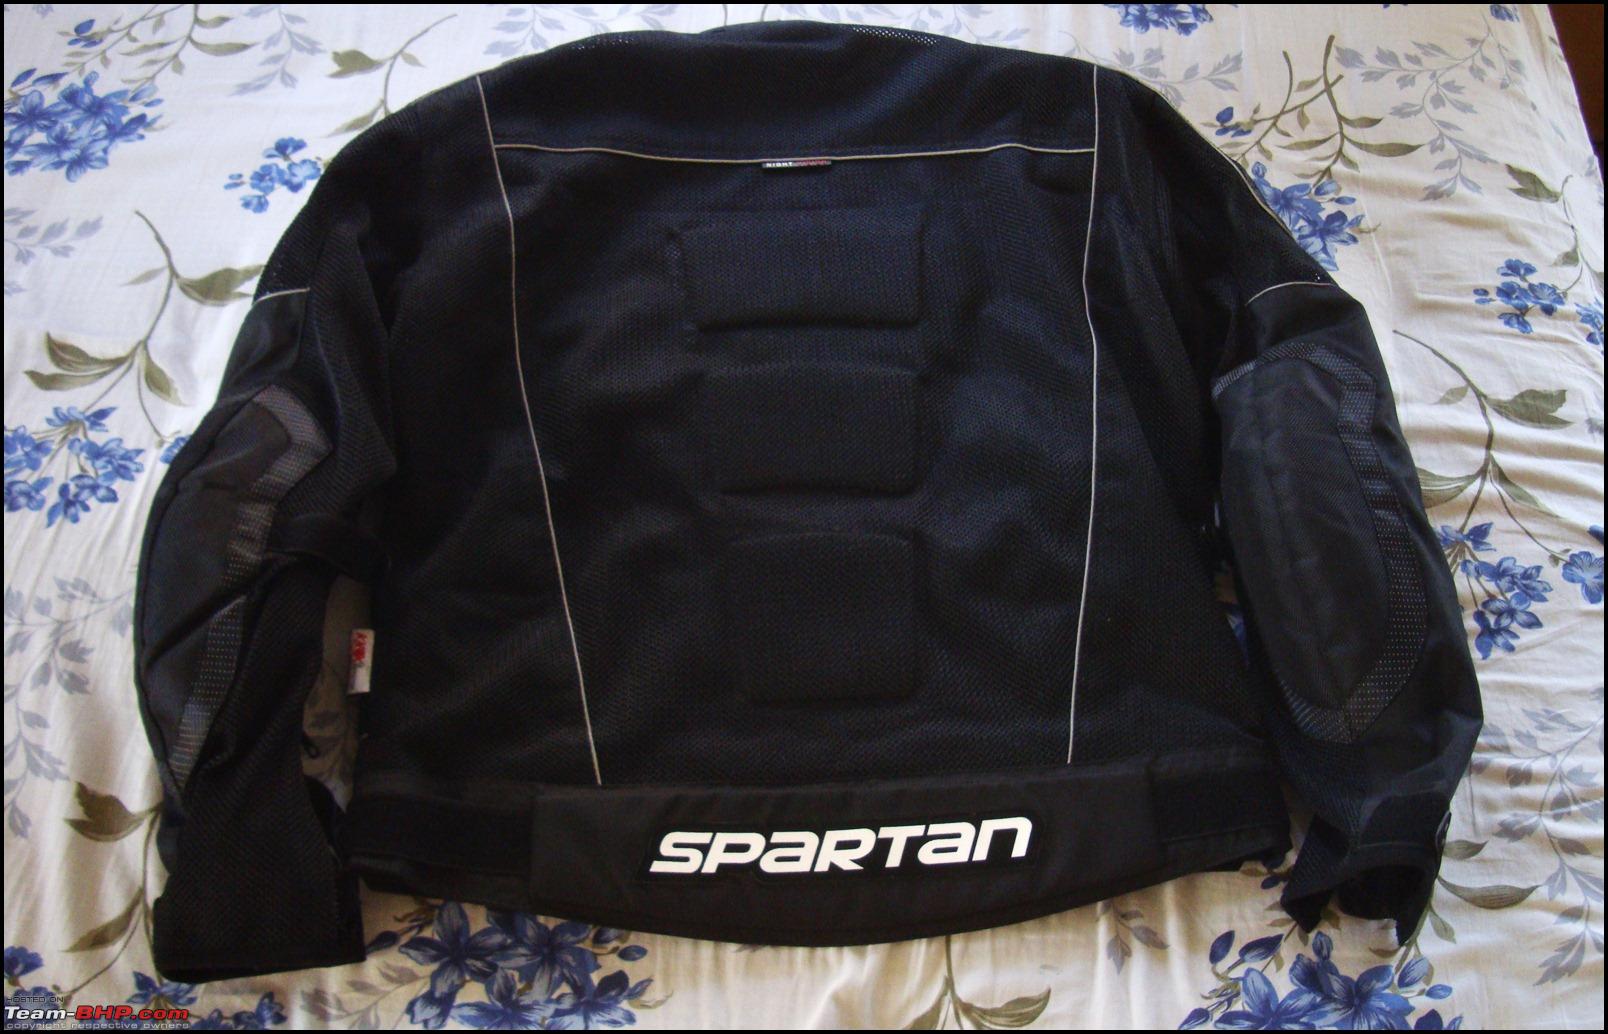 SCIMITAR Mars Riding Pants in Coimbatore at best price by Spartan Progear  Closed Down  Justdial